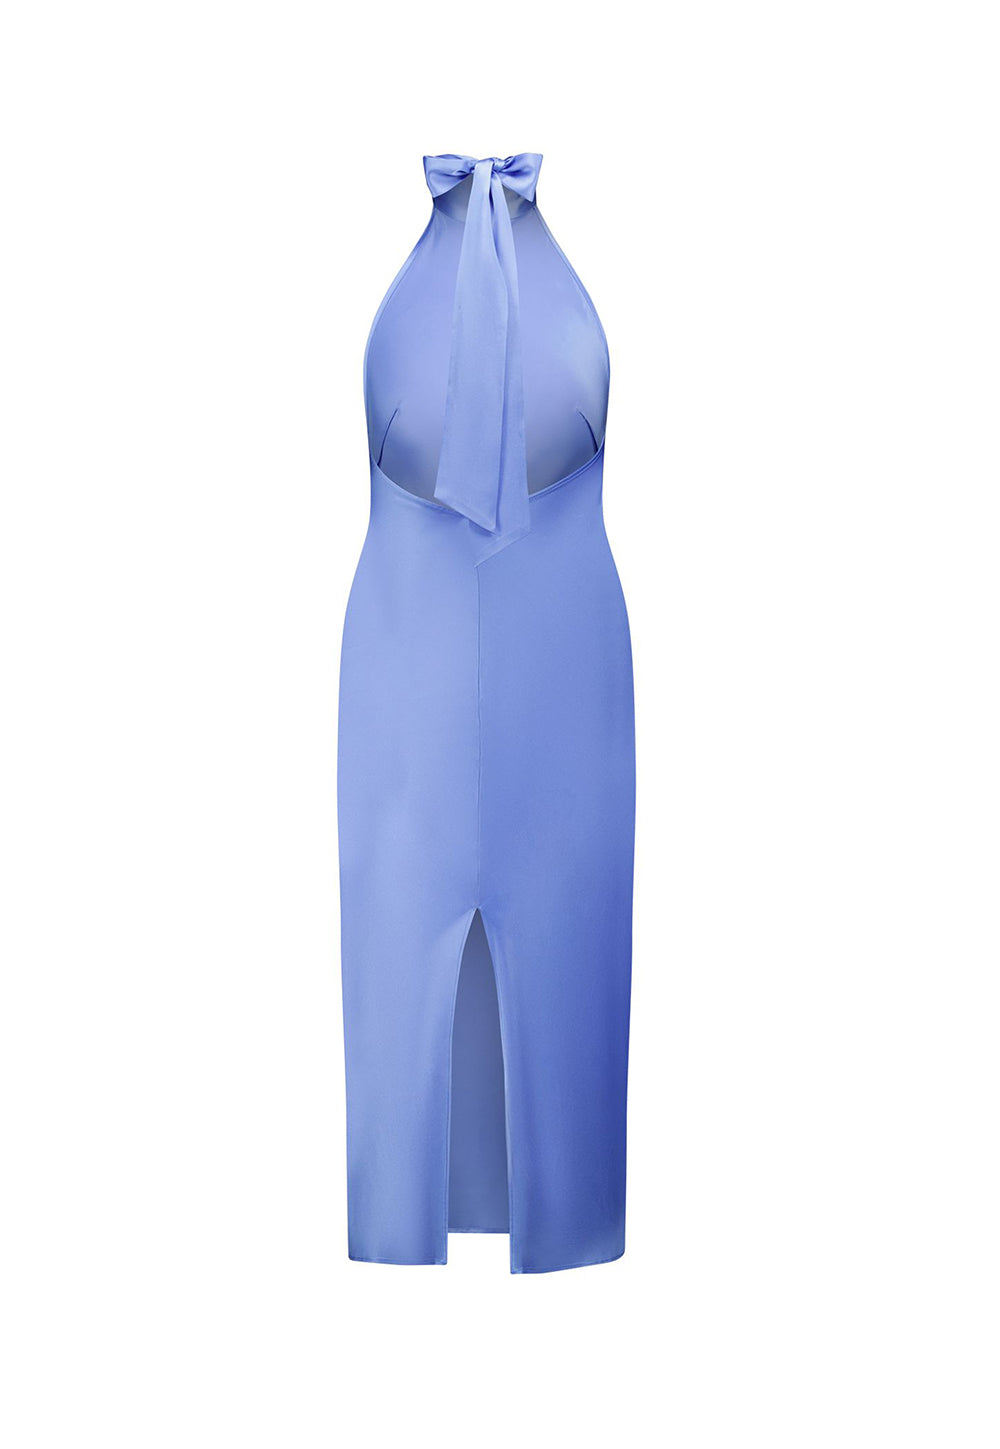 By Your Side Dress - Blue Silk sold by Angel Divine